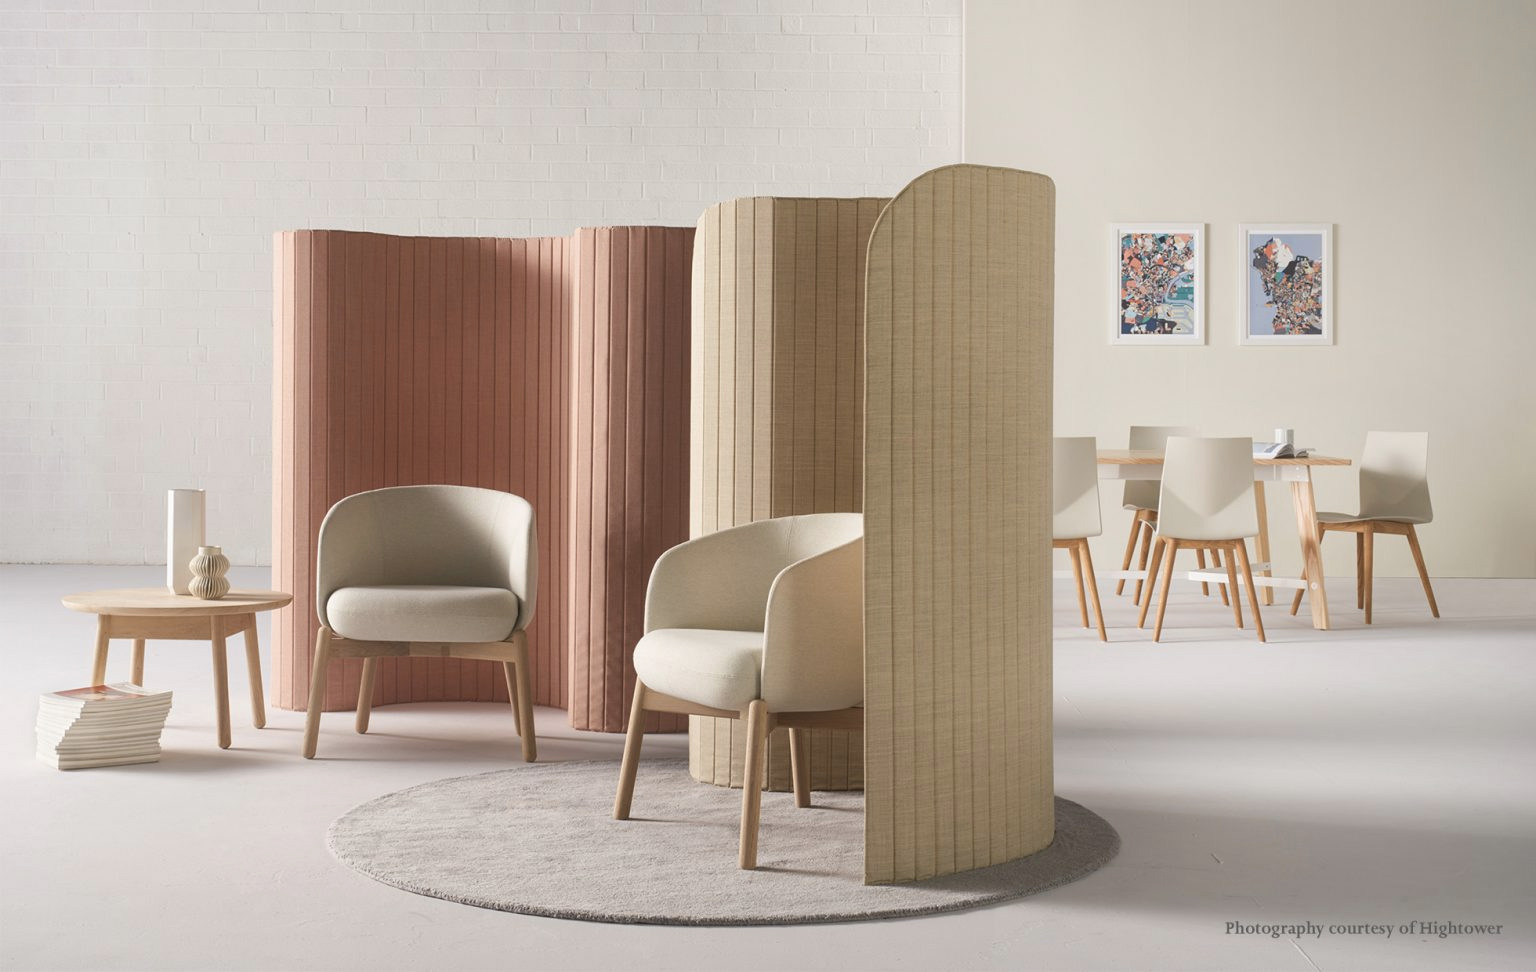 Focus office divider is a tactile mobile partition system that creates micro-pods for workers in open plan spaces. A table top version is also available to further divide spaces.